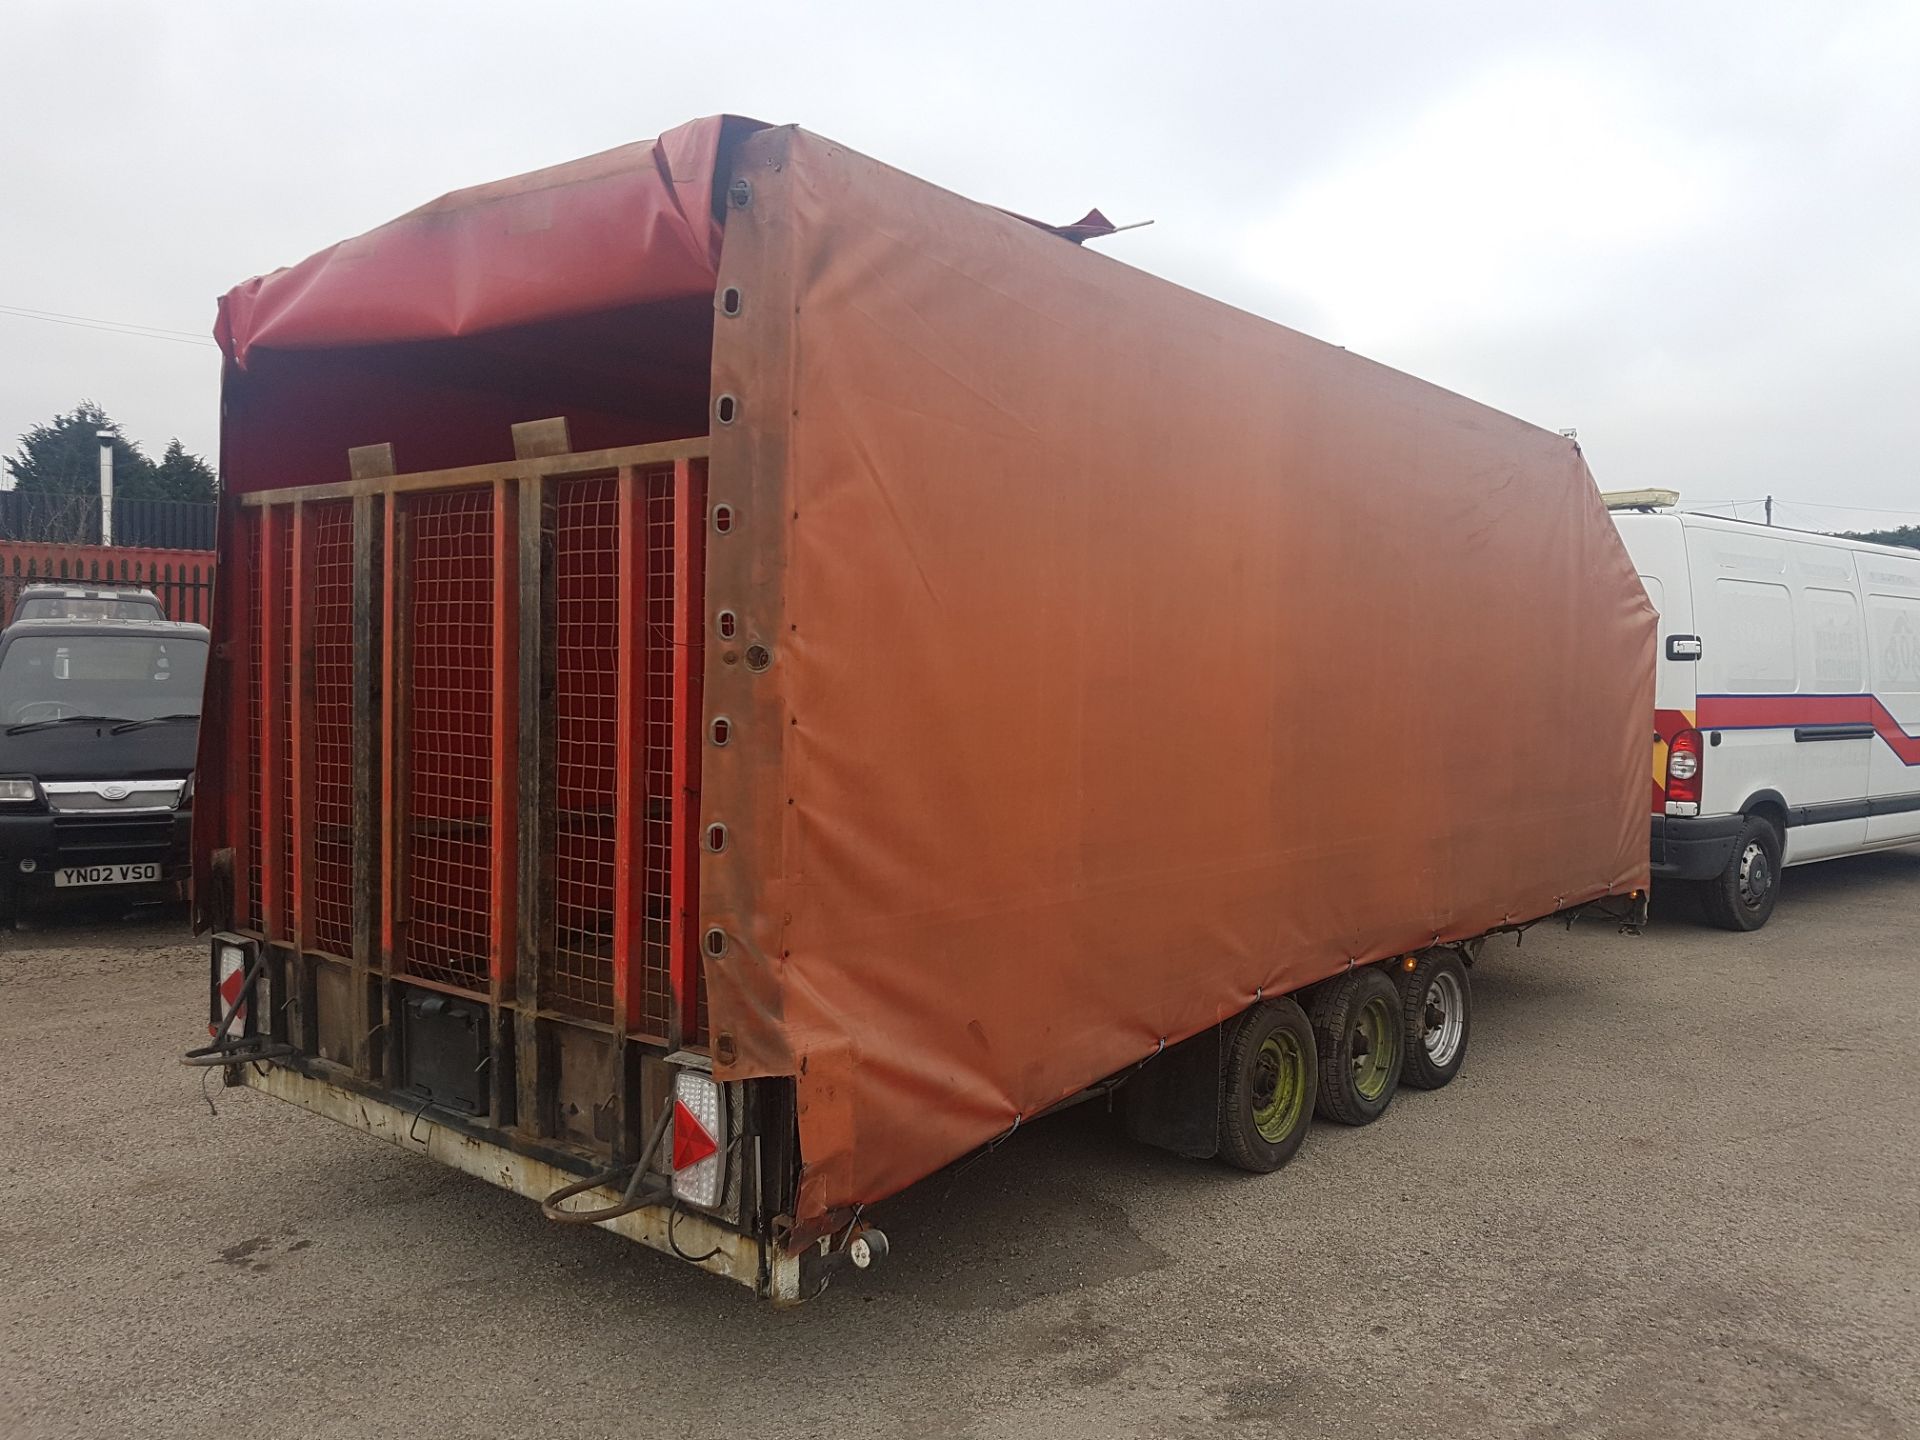 TRI-AXLE BEAVER-TAIL CAR TRANSPORTER COVERED TRAILER - 5.5 METRE BED LENGTH! *PLUS VAT* - Image 6 of 13